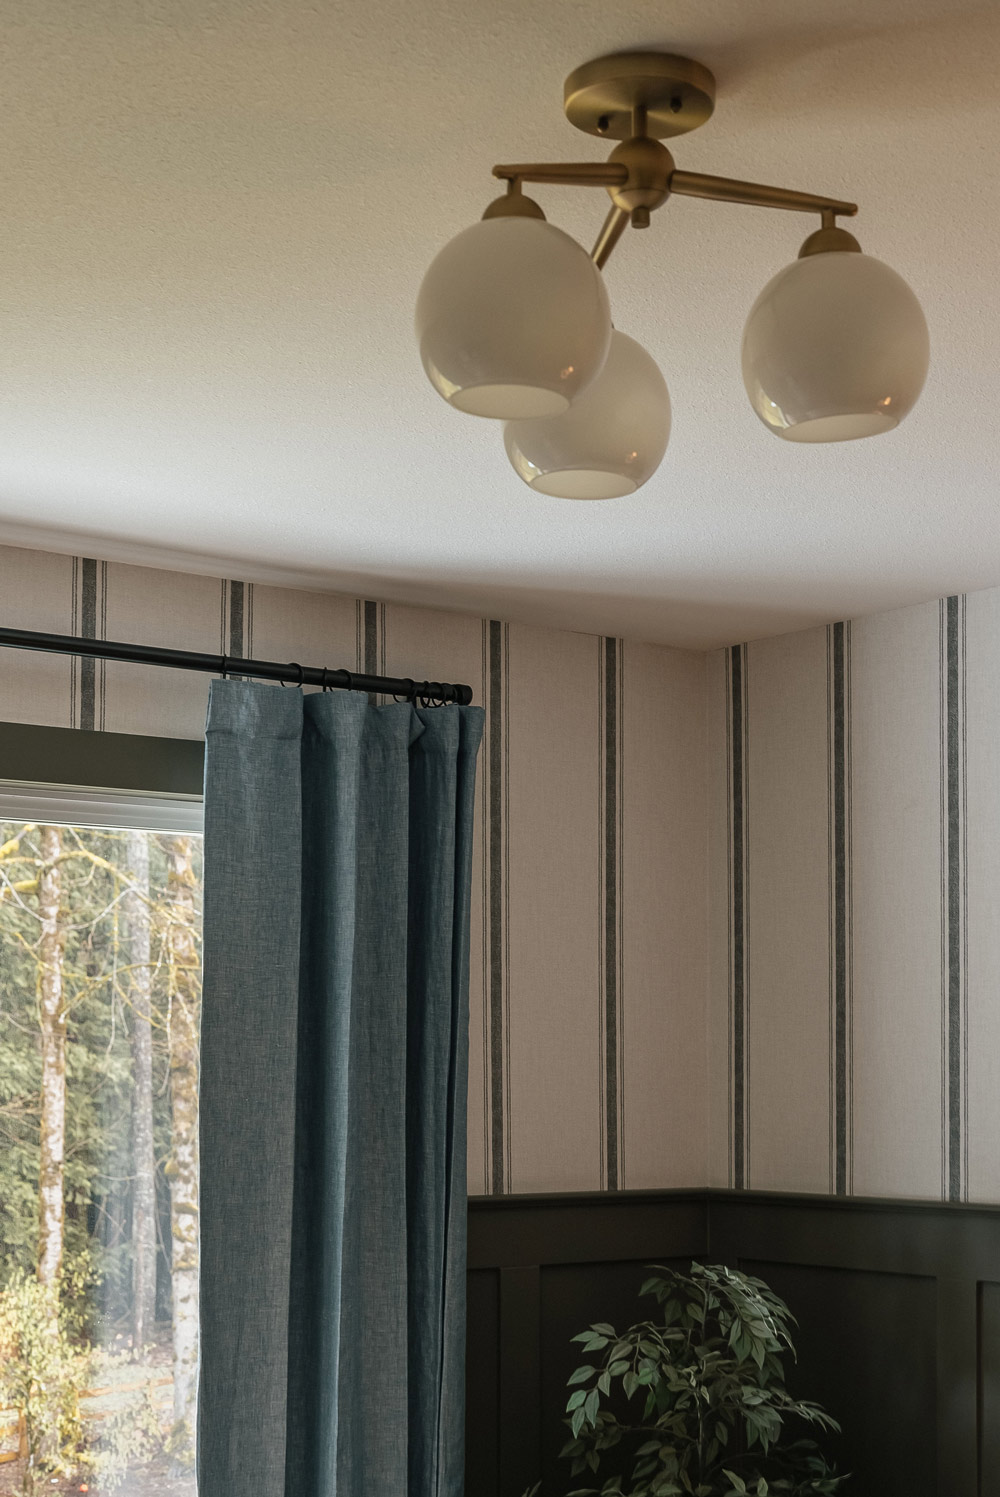 3-light fixture on the ceiling, striped wallpaper, and a window with a curtain.